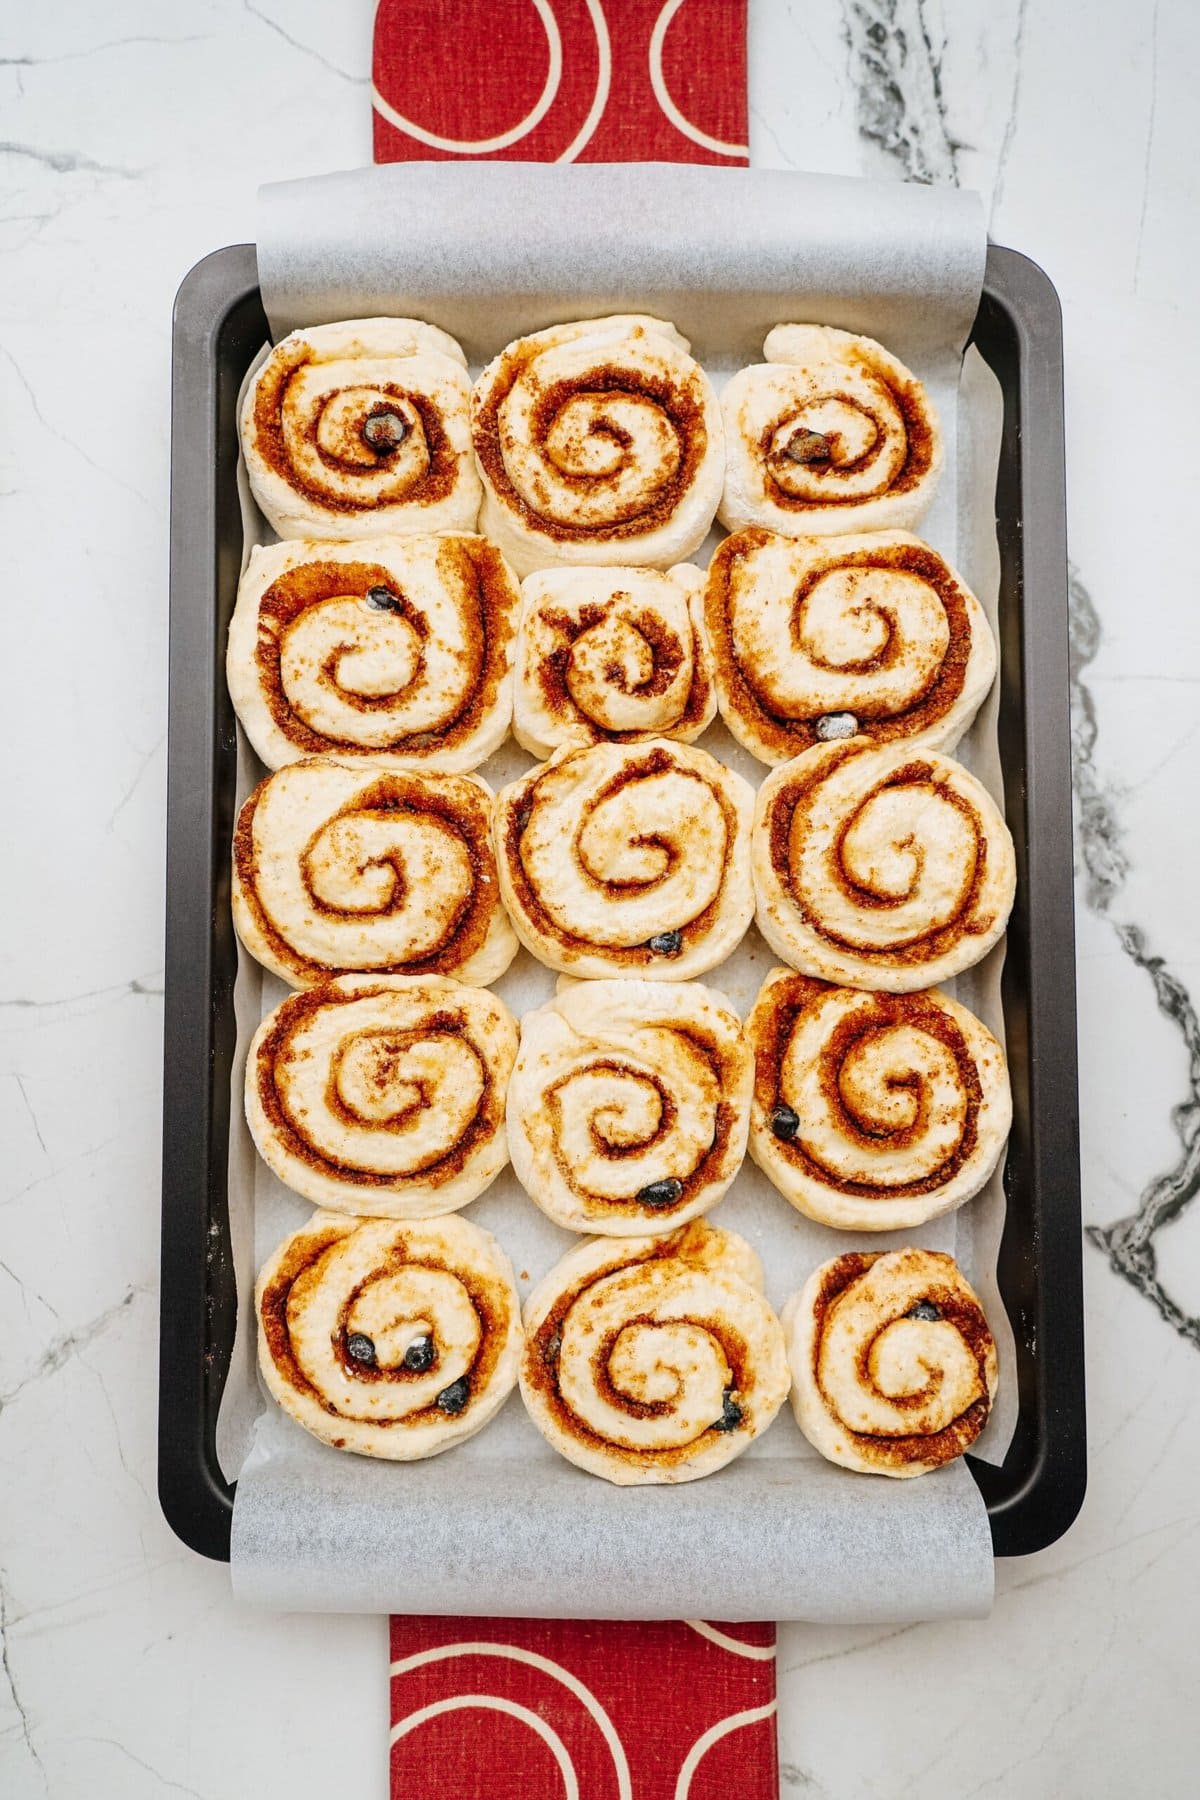 A baking tray featuring evenly spaced, uncooked cinnamon rolls on parchment paper, arranged in a 4x5 grid pattern, rests on a marble countertop with a red and white patterned cloth underneath.